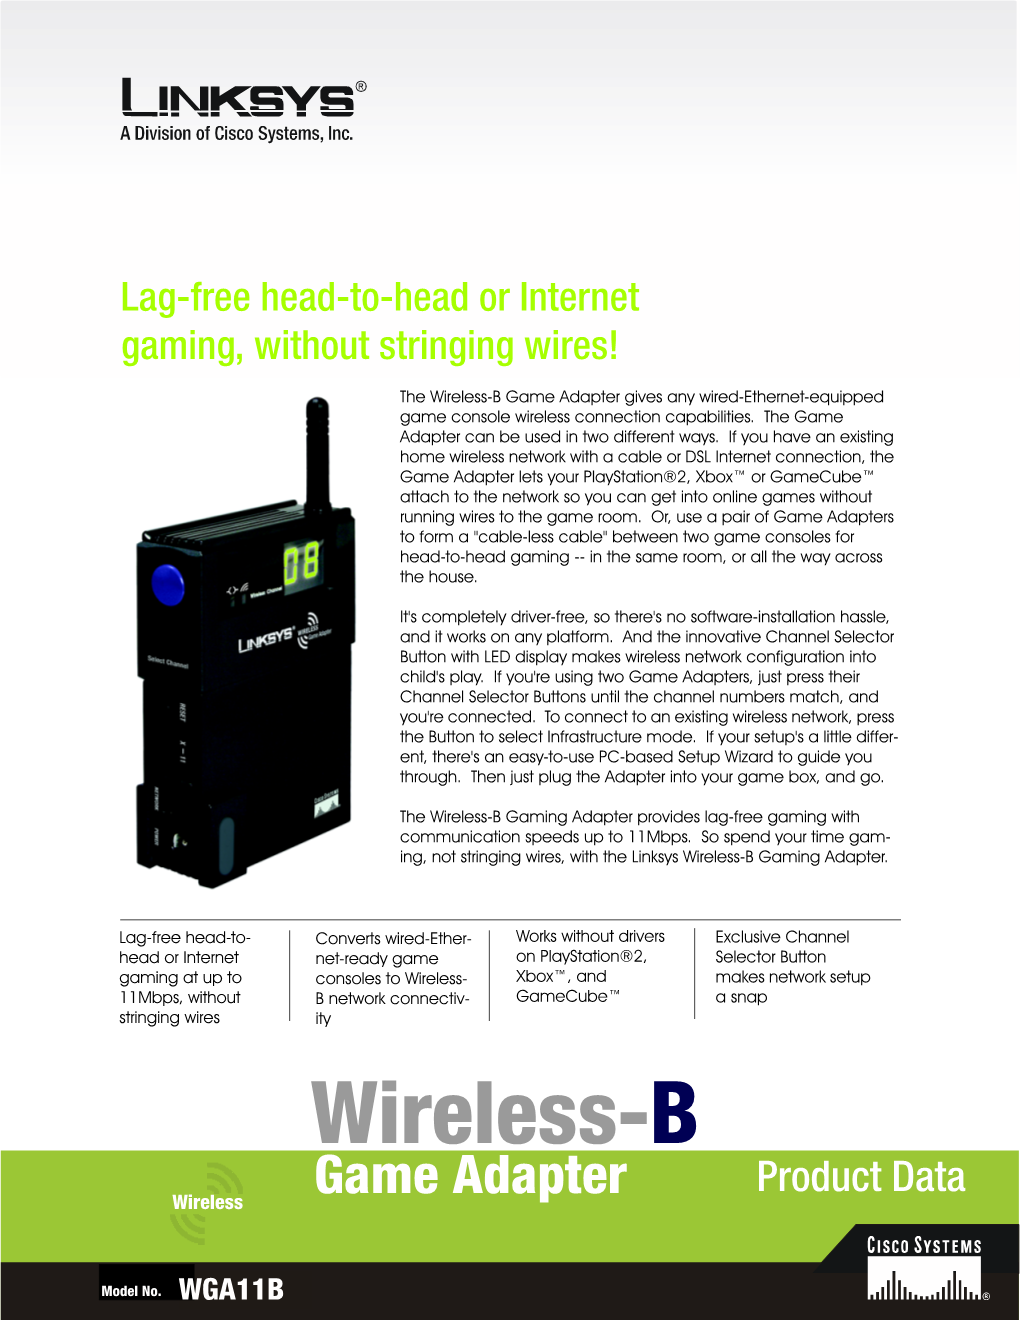 Wireless-B Game Adapter Gives Any Wired-Ethernet-Equipped Game Console Wireless Connection Capabilities